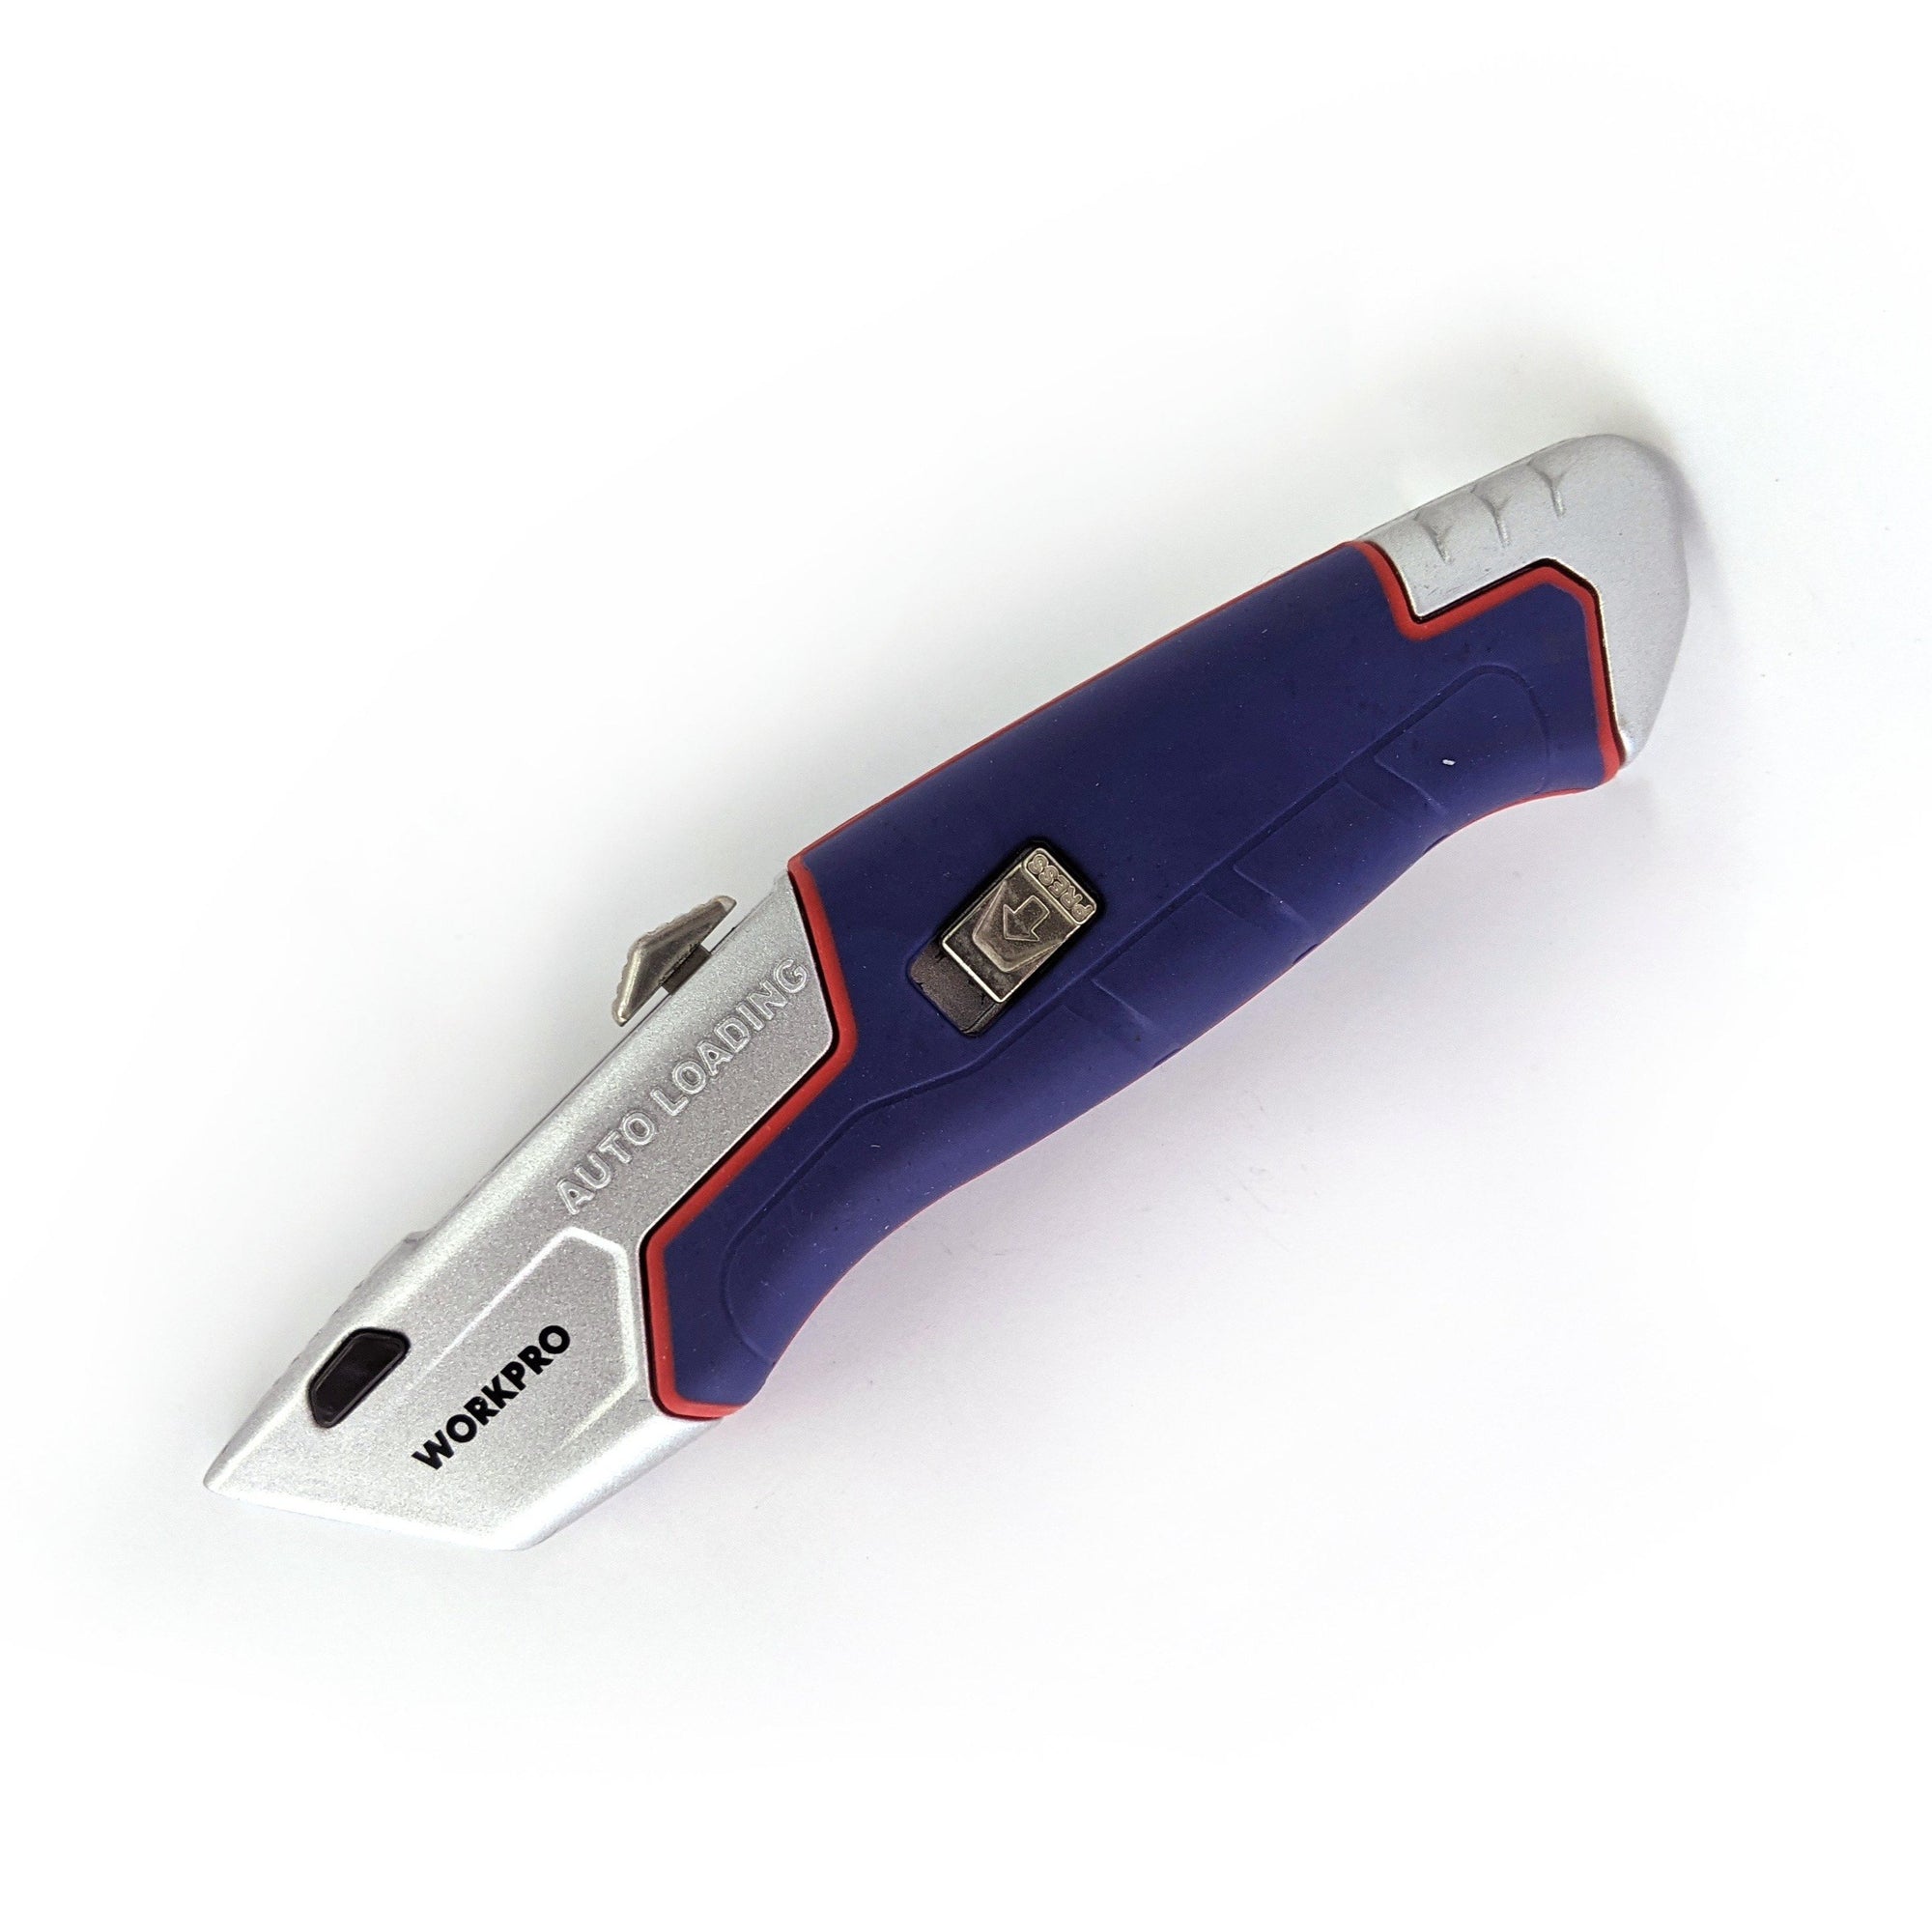 Workpro Auto-Loading Retractable Utility Knife